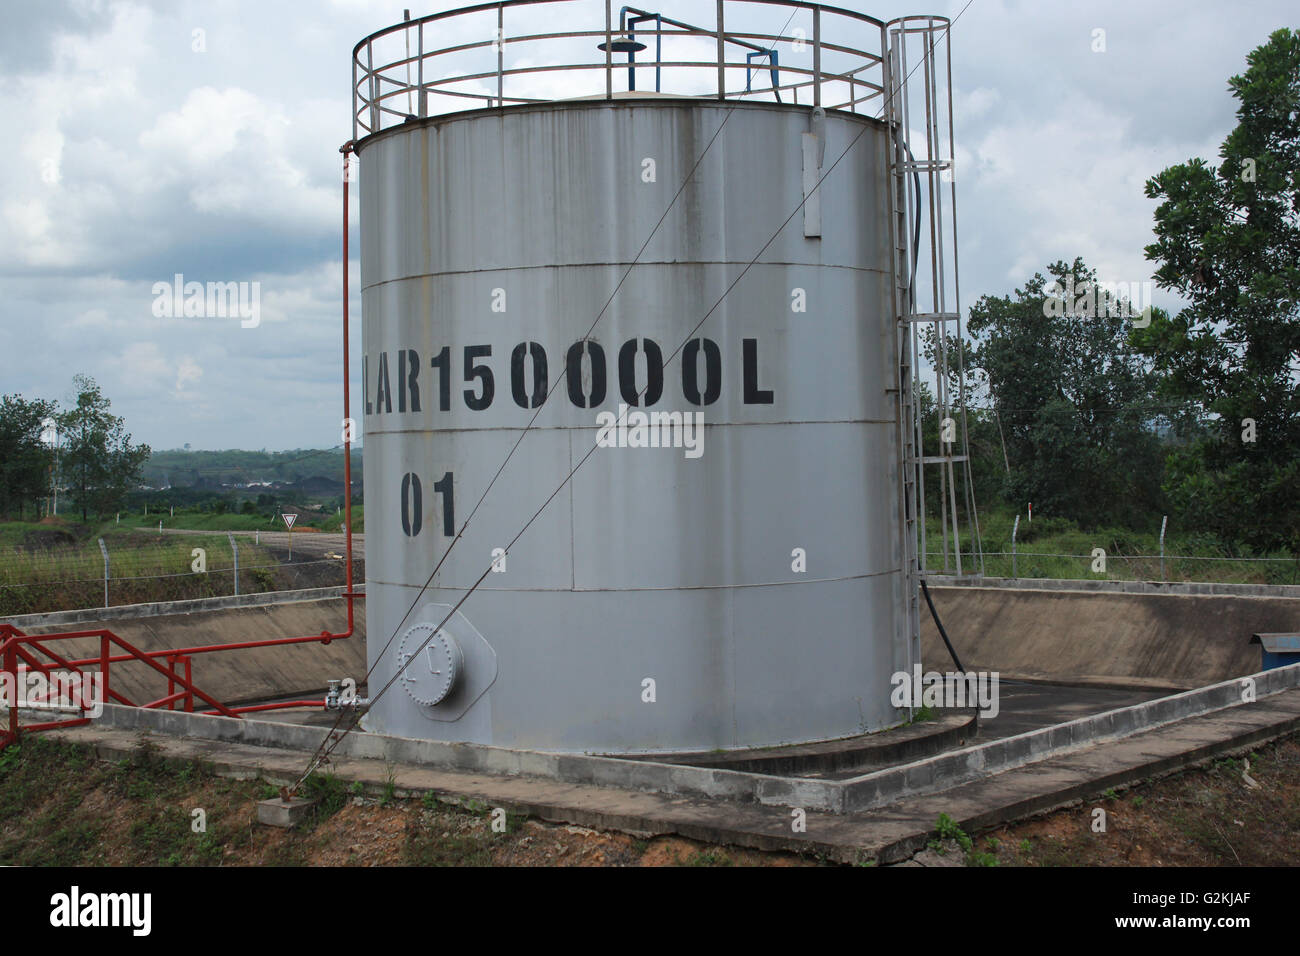 Large capacity white tanks for diesel fuel Stock Photo